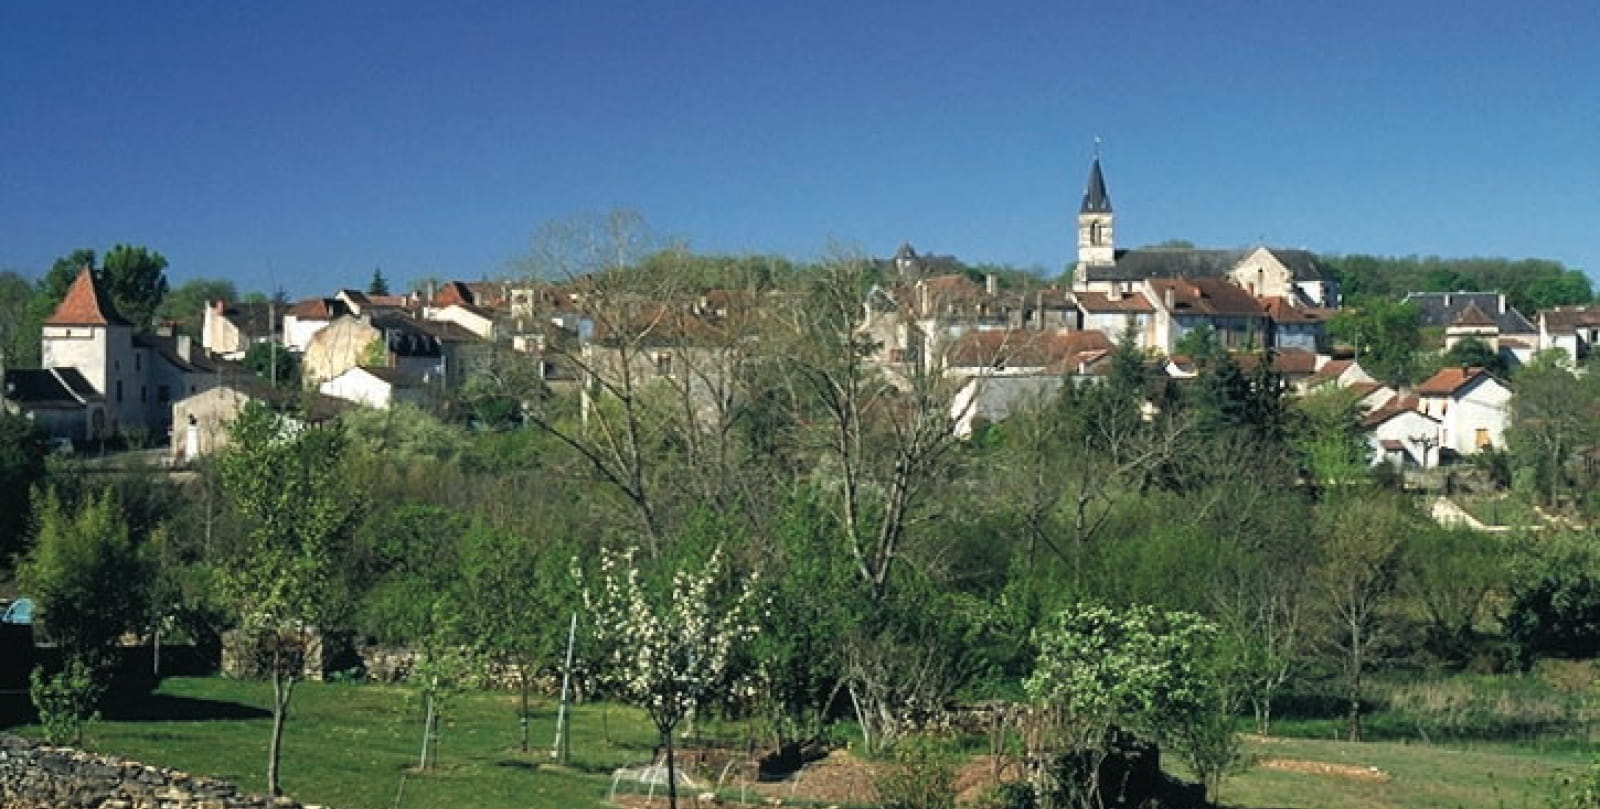 Limogne in Quercy: View of the Village